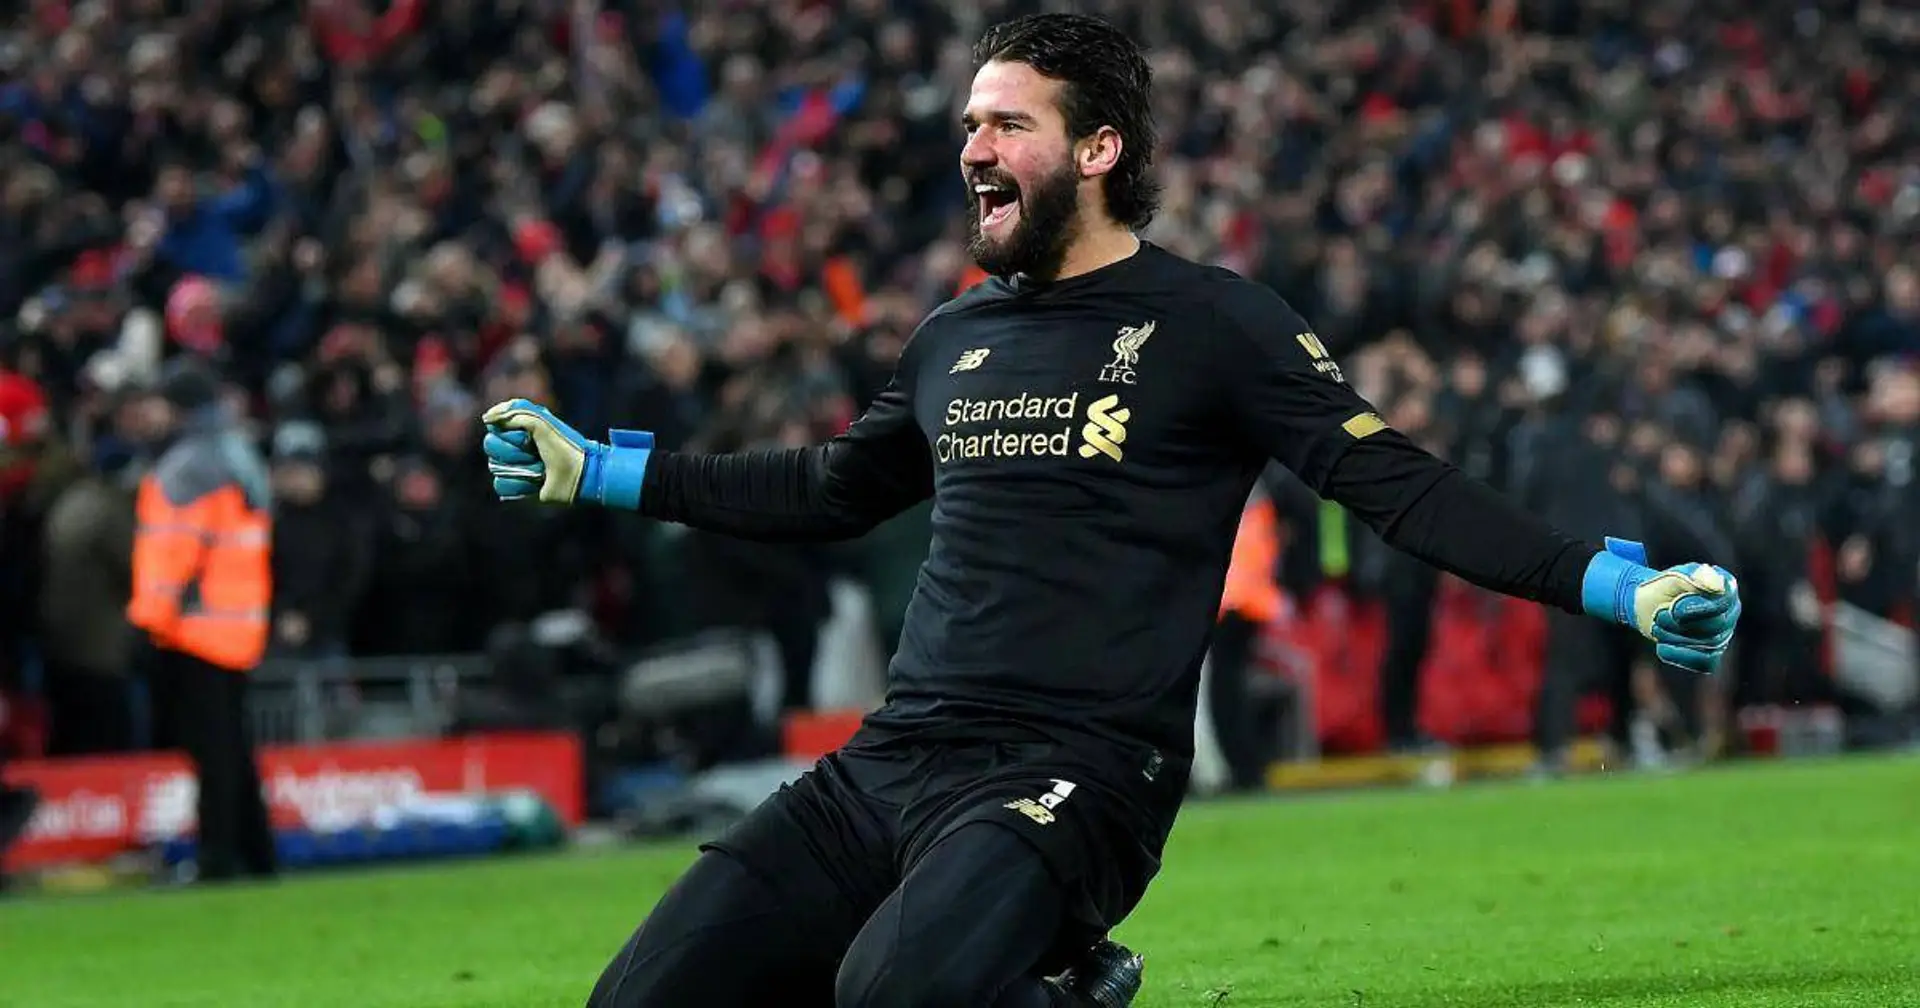 'We have to be different': Alisson highlights challenges of being a goalkeeper, adds that he loves his role